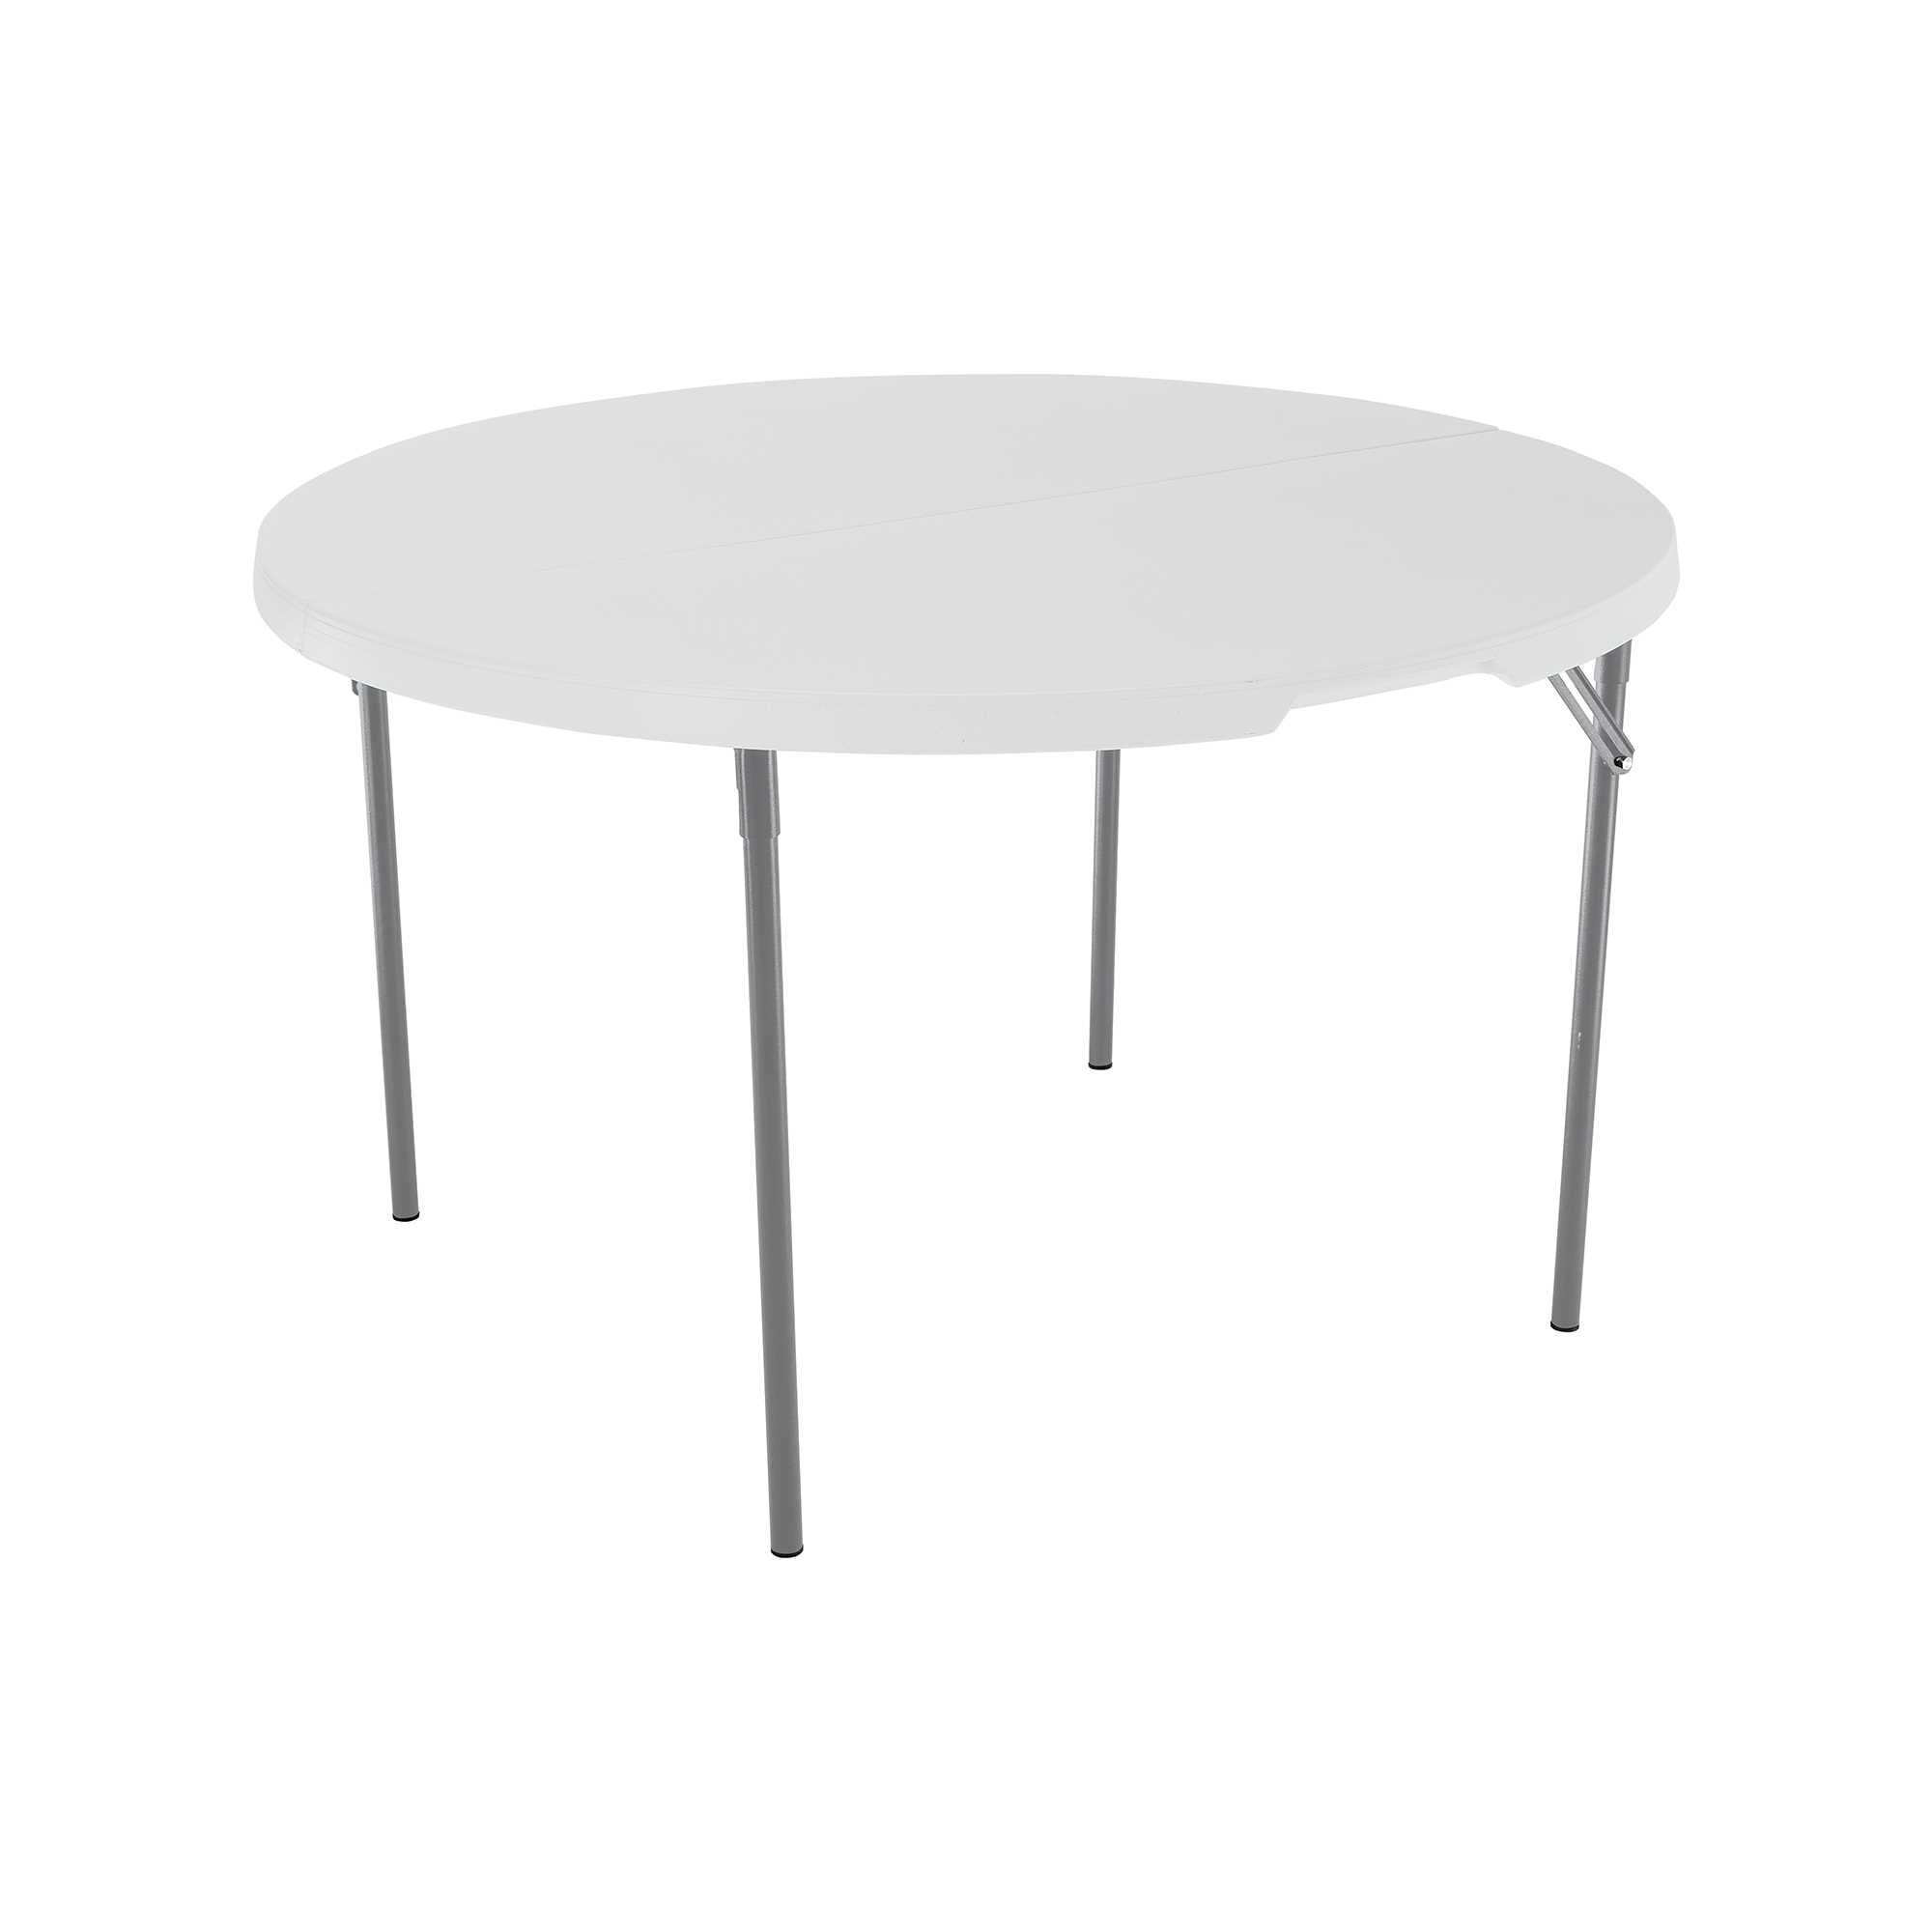 Lifetime 48-Inch Round Fold-In-Half Table, Almond - Walmart.com A Table With A Round Top Is Cut In Half